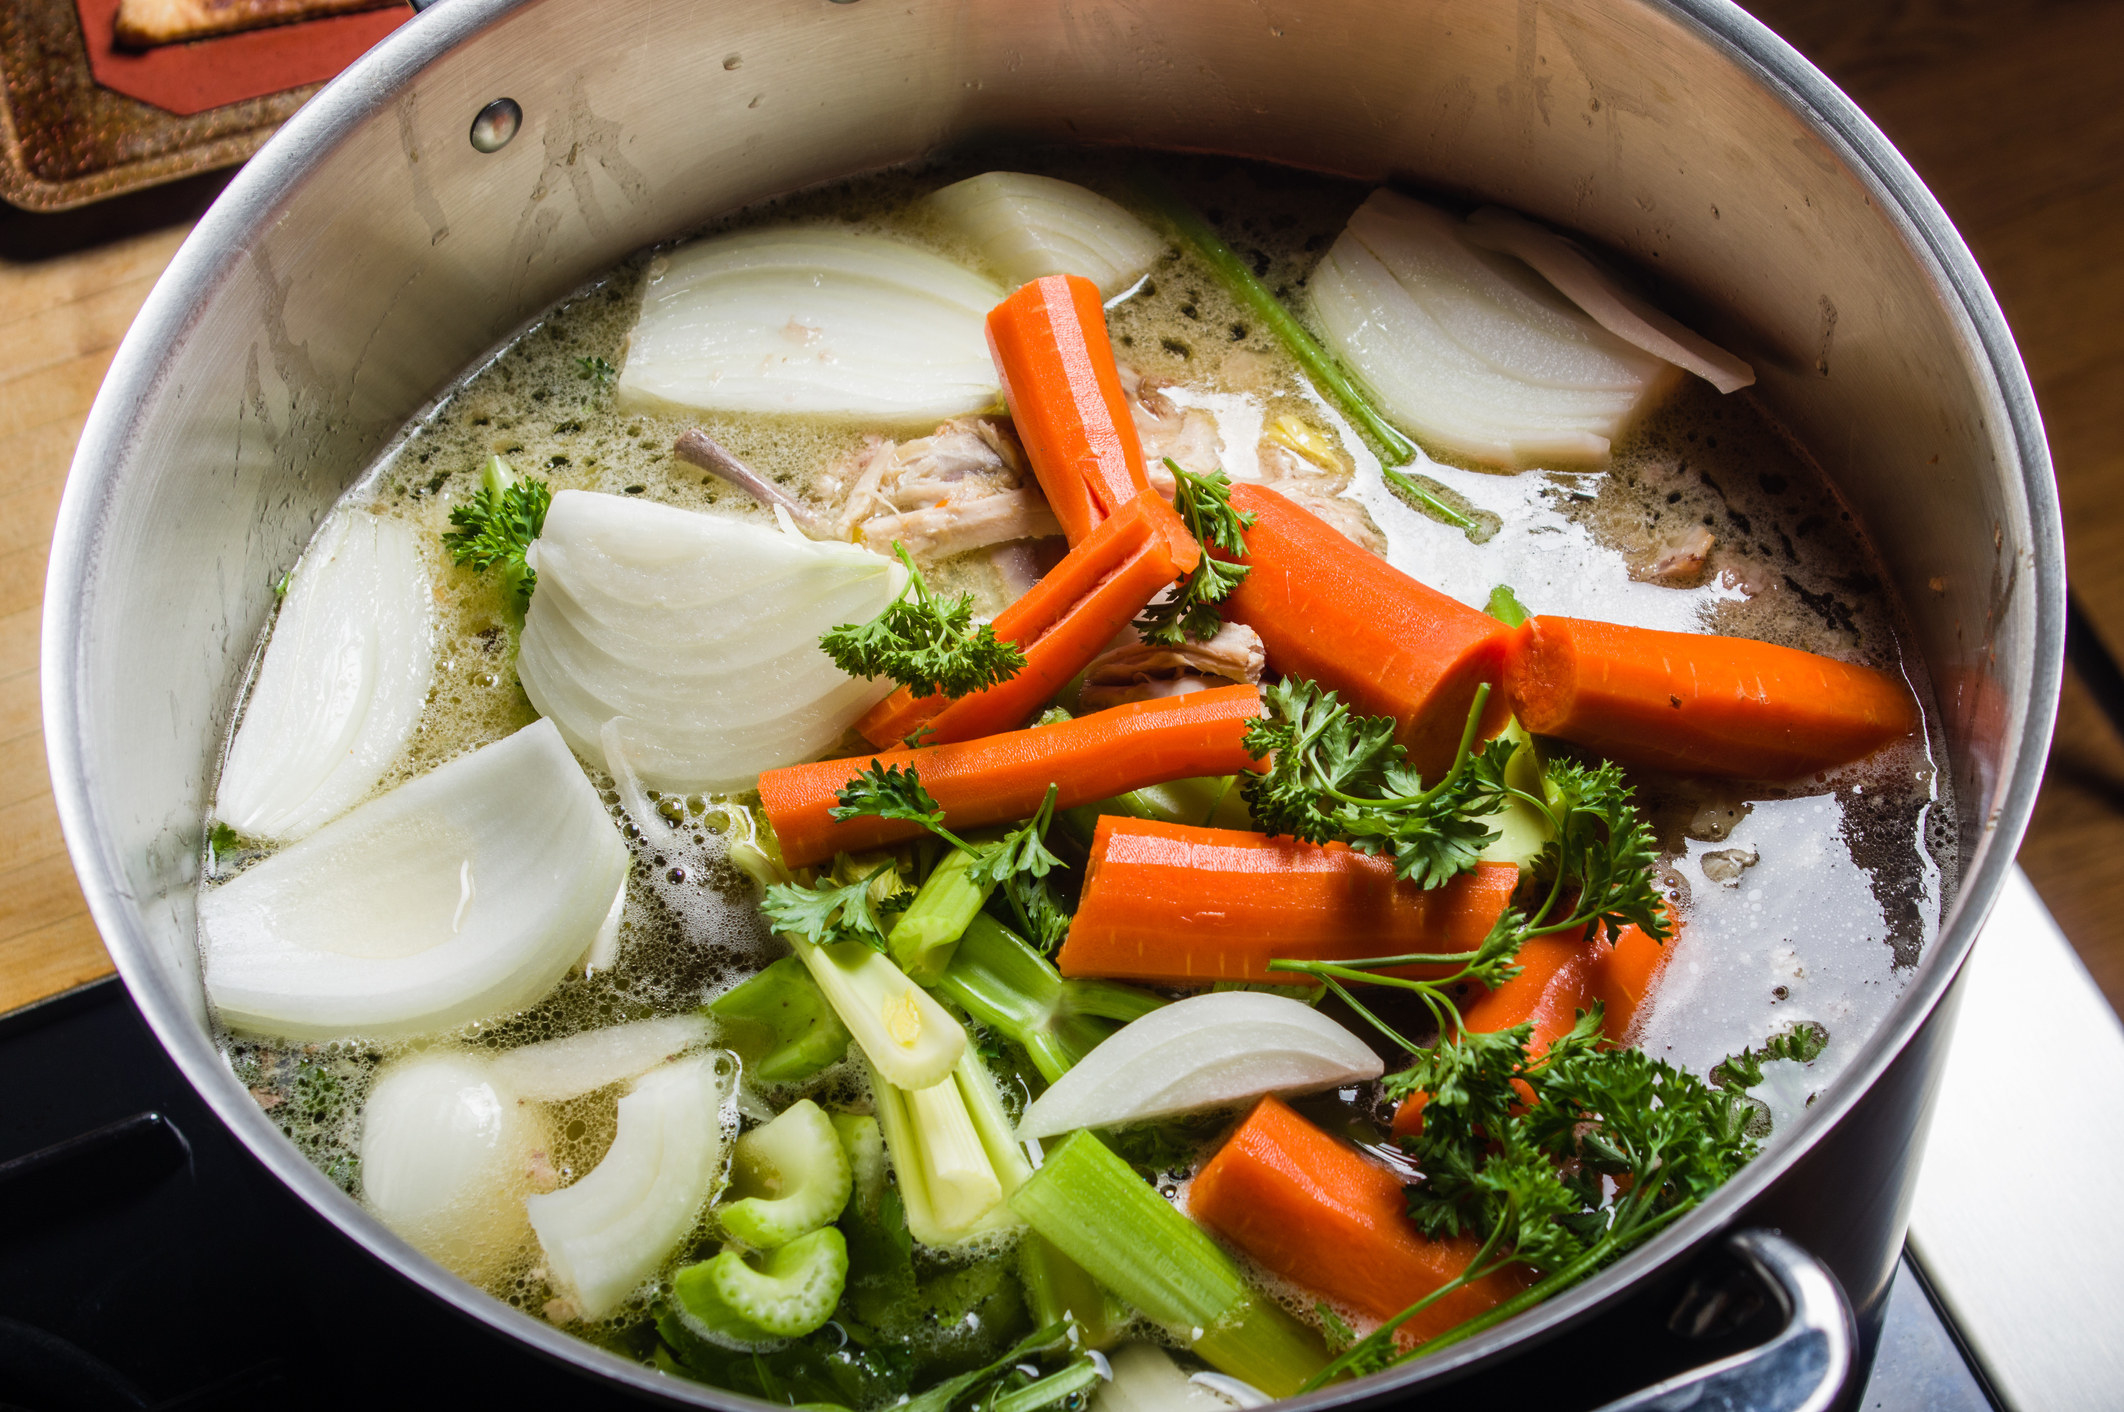 A pot with veggies and bones for stock.